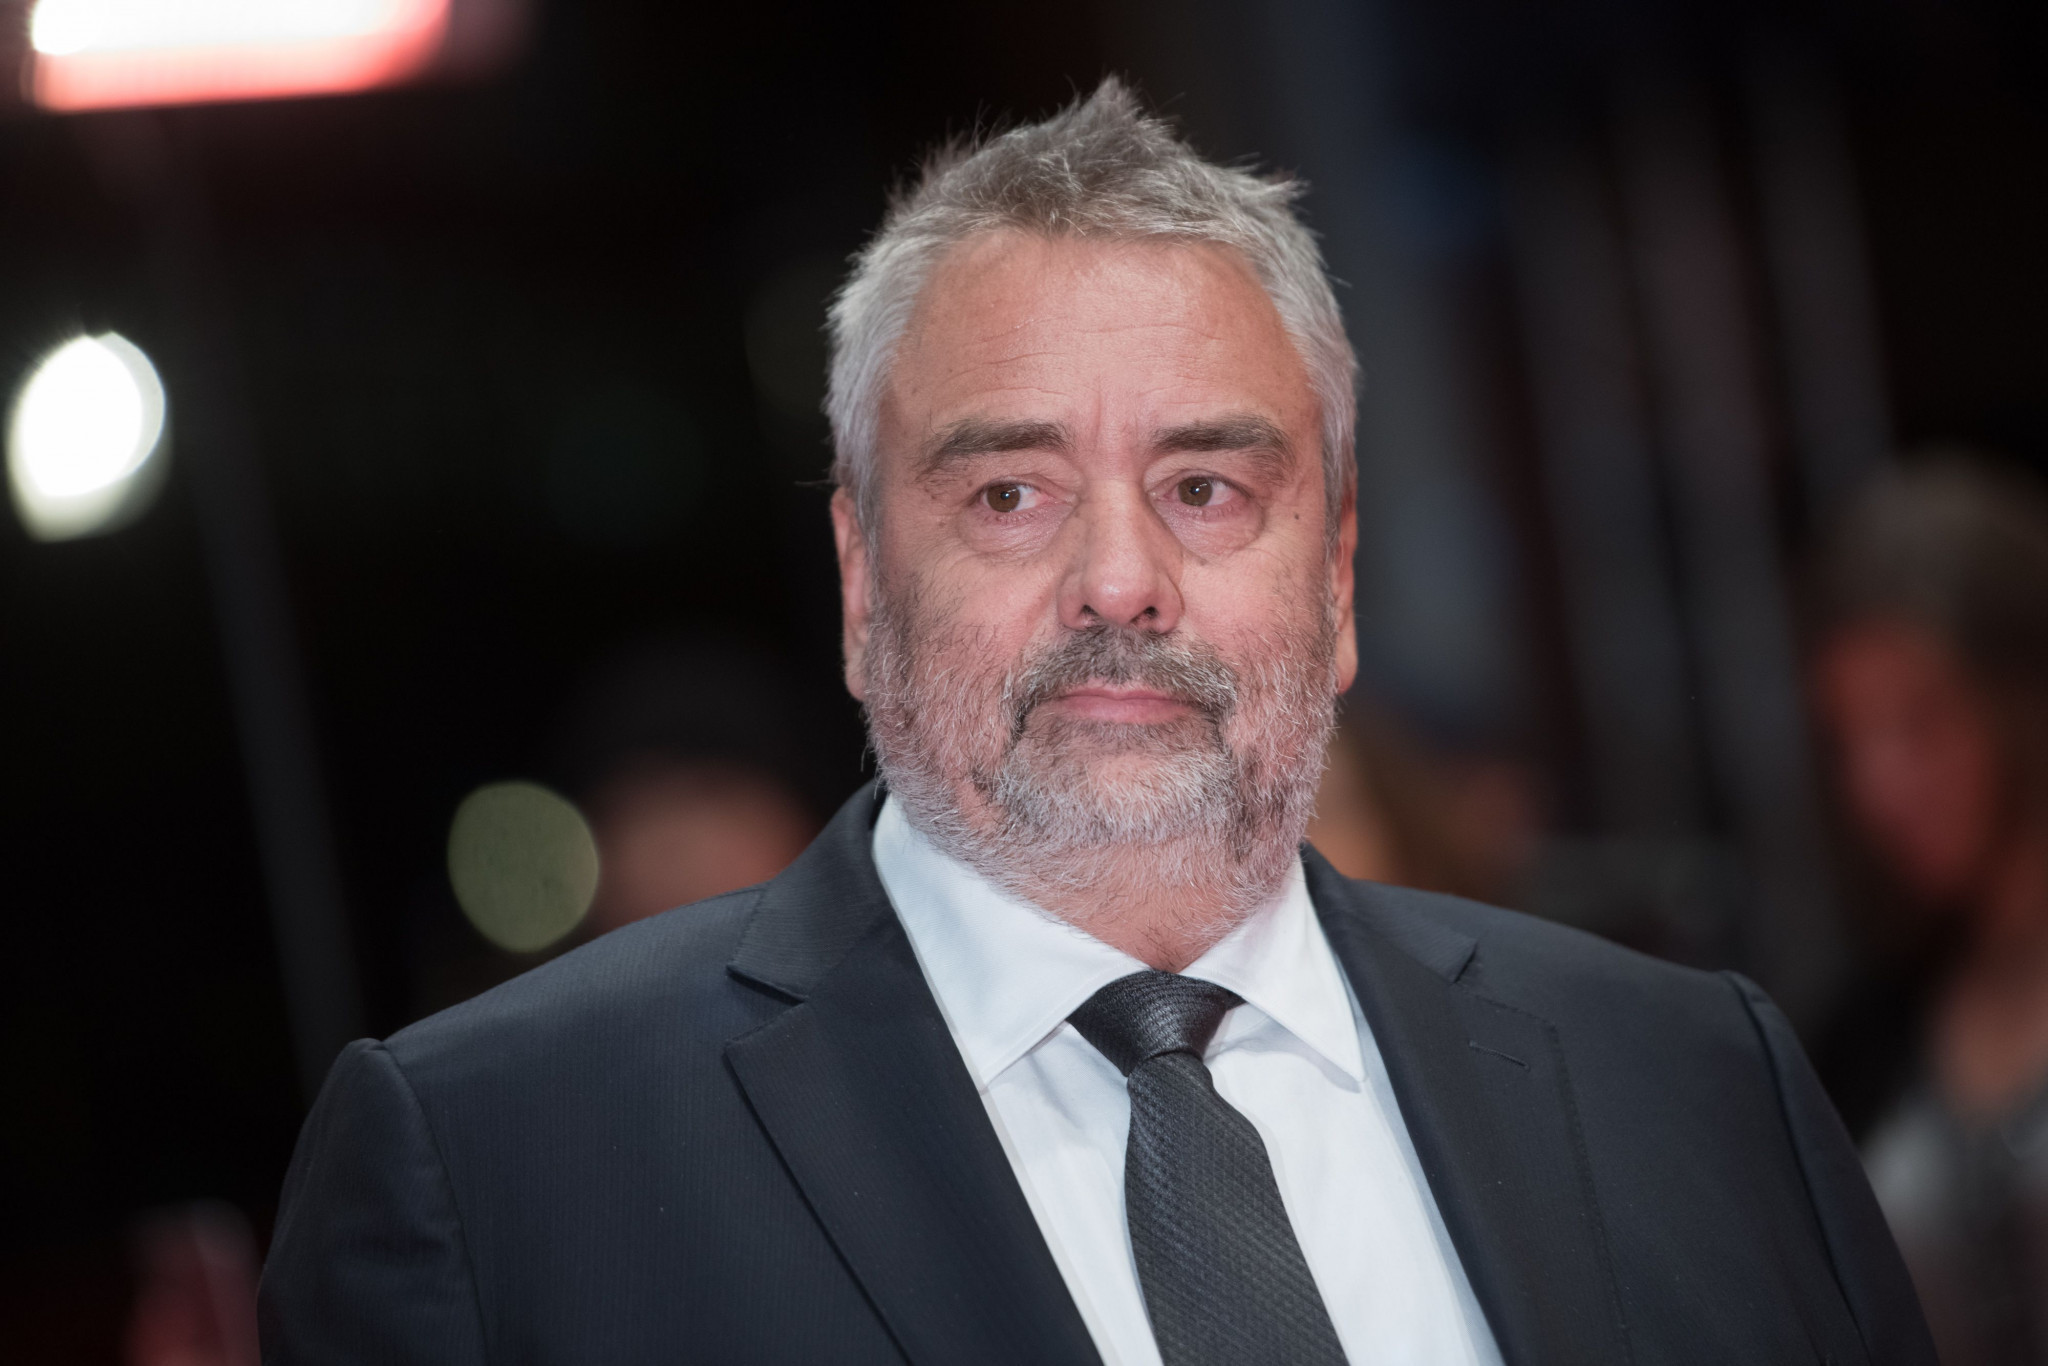 Luc Besson, who produced the promotional film for Paris' 2012 Olympic and Paralympic Games bid, is the co-founder of EuropaCorp  ©Getty Images